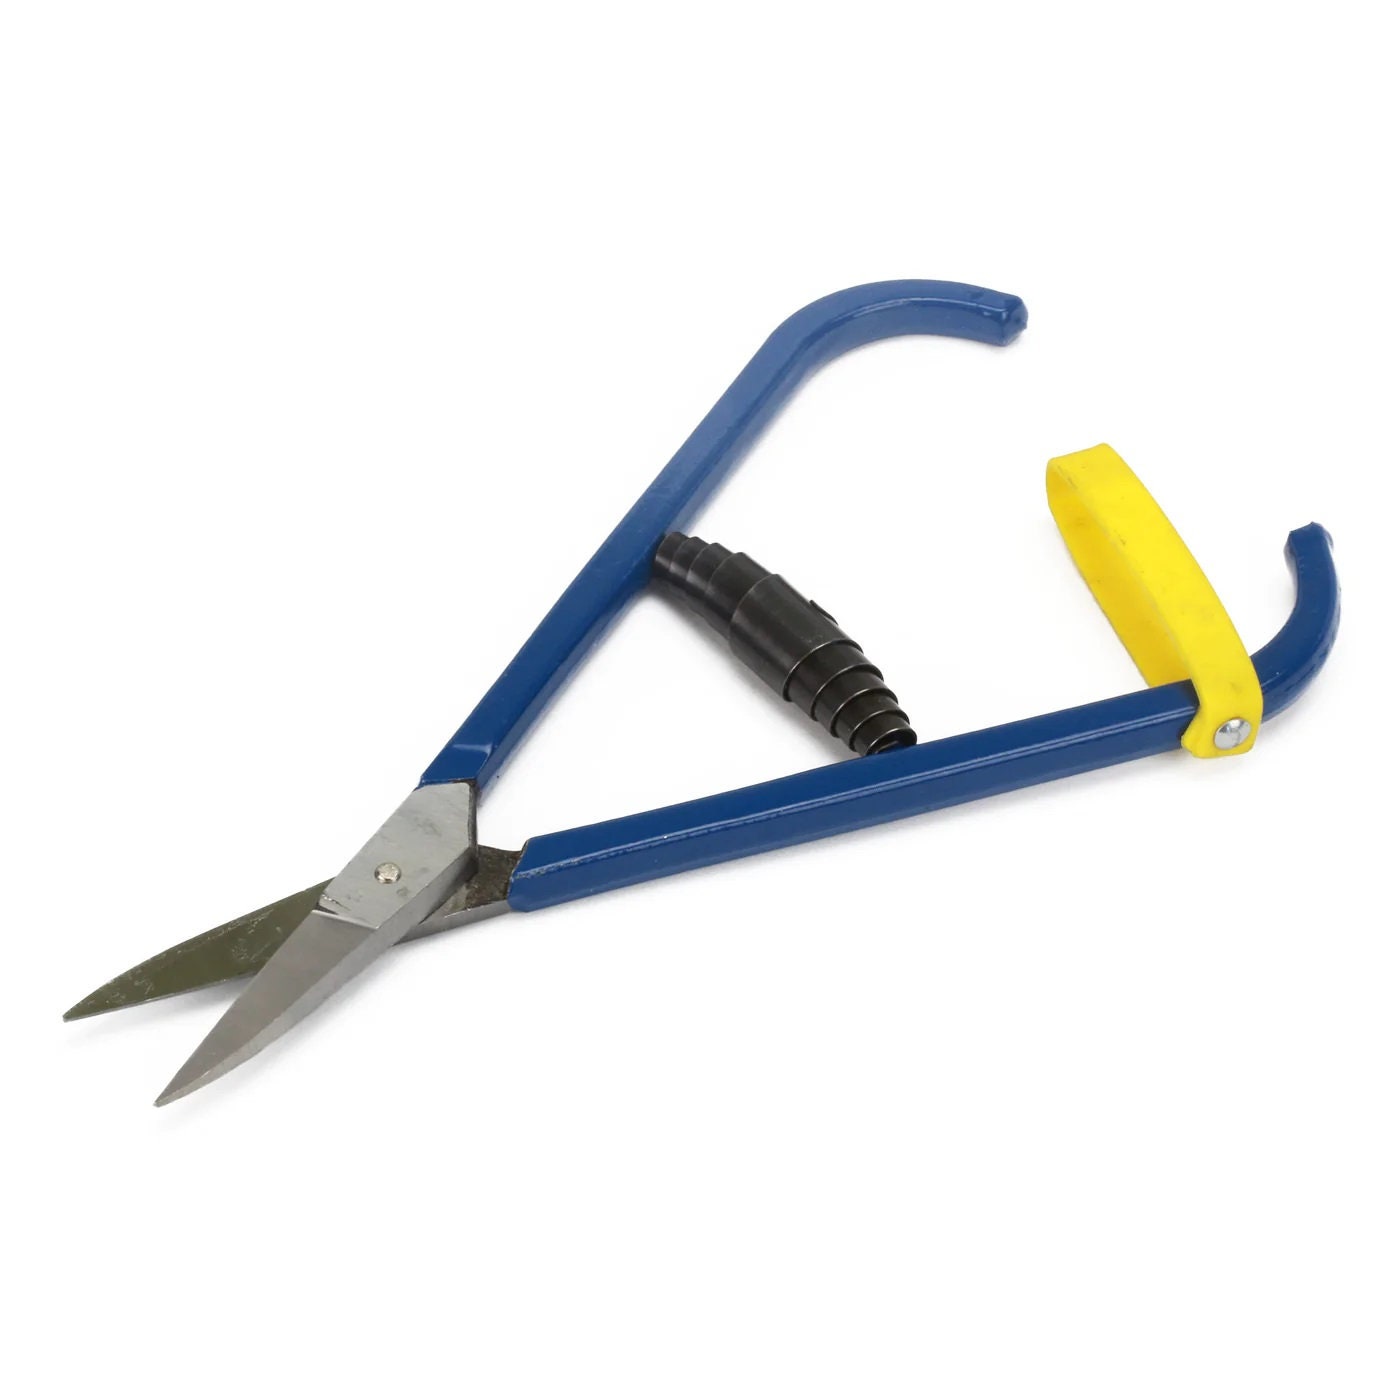 Metal shear pack, French Style, Sheet metal shears, Straight and